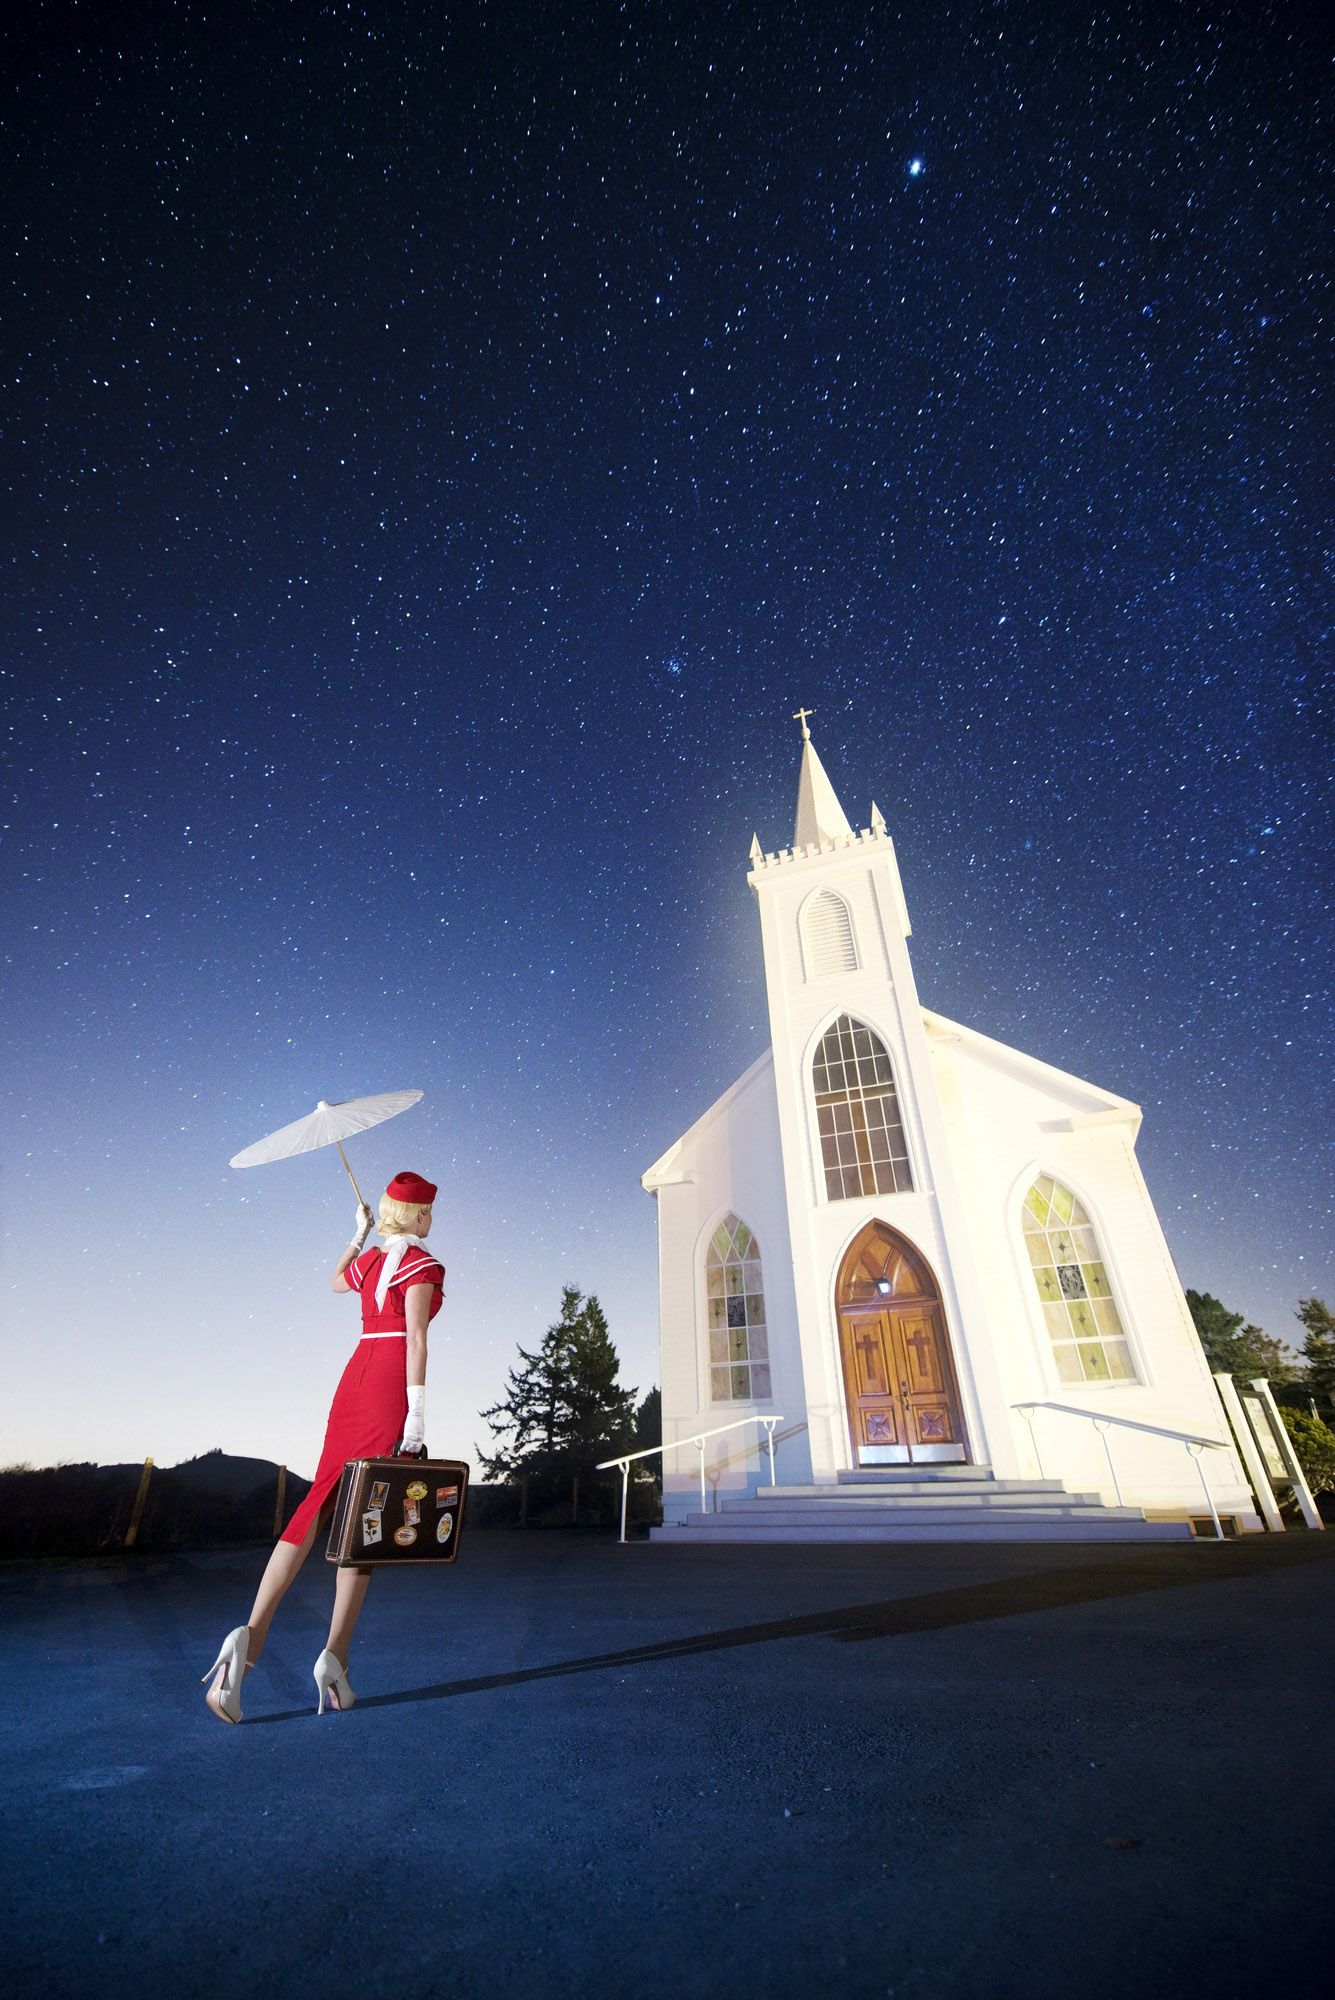 Woman in a red approaches a church under a starry night sky in Bodega, California.